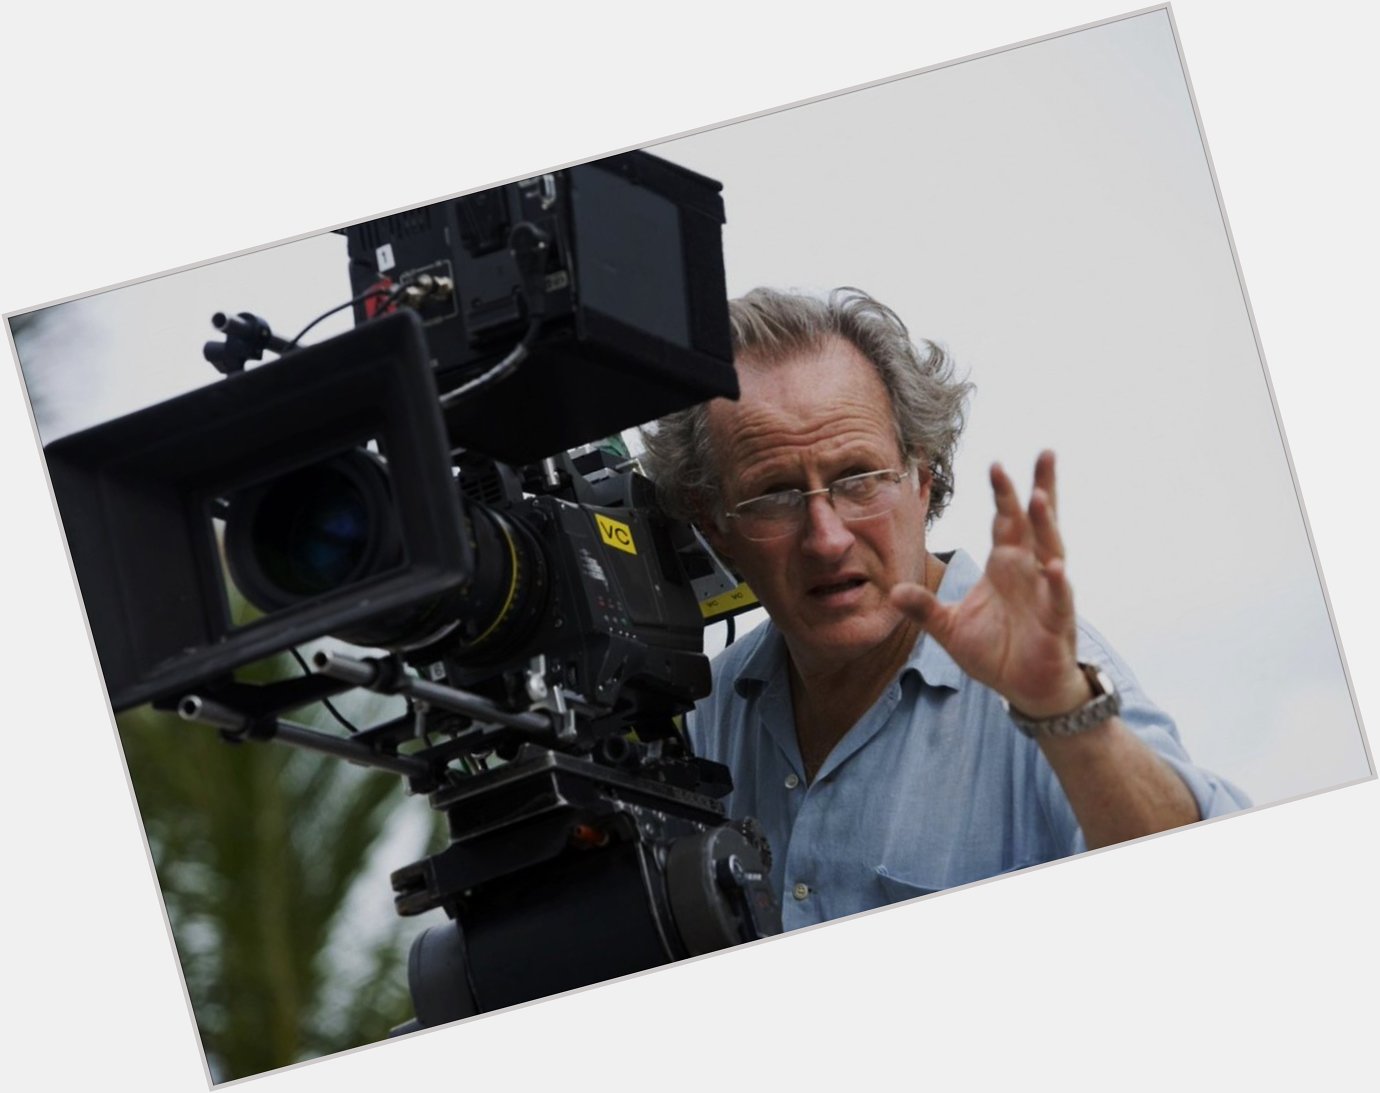 Happy birthday to the big director,Michael Mann, he turns 76 years today
Producer | Writer | Director            